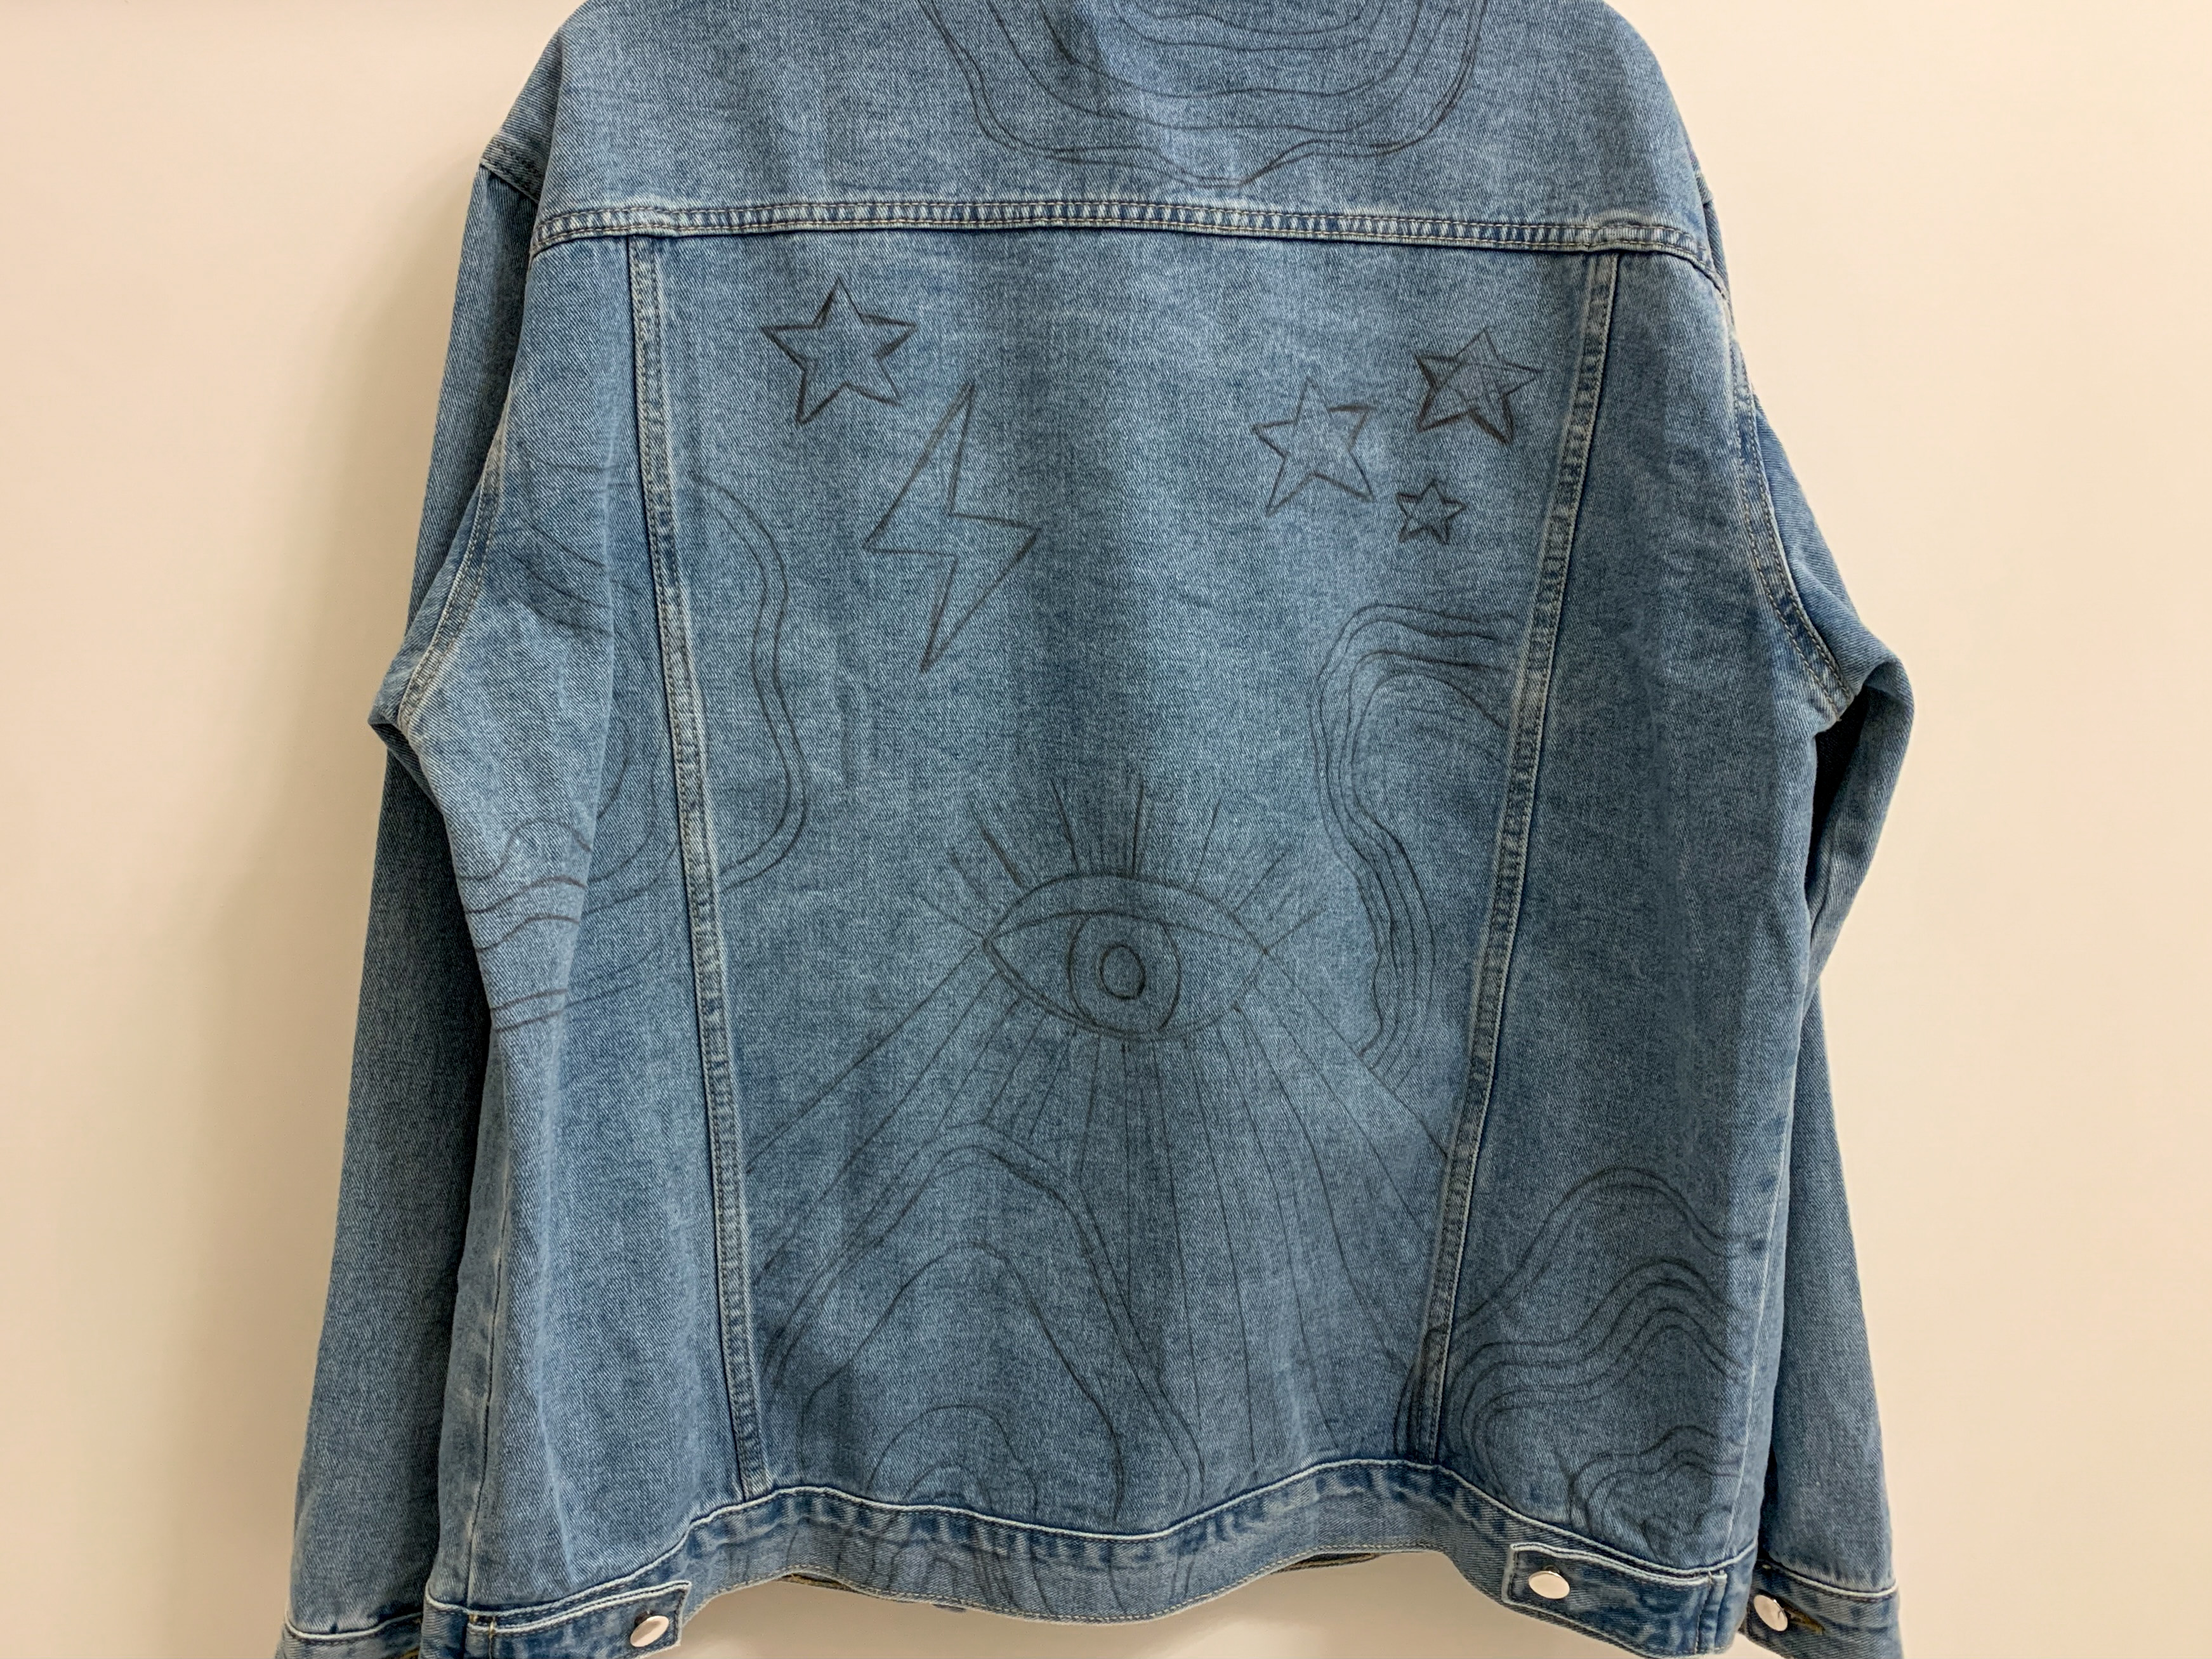 jacket with pencil drawing on it